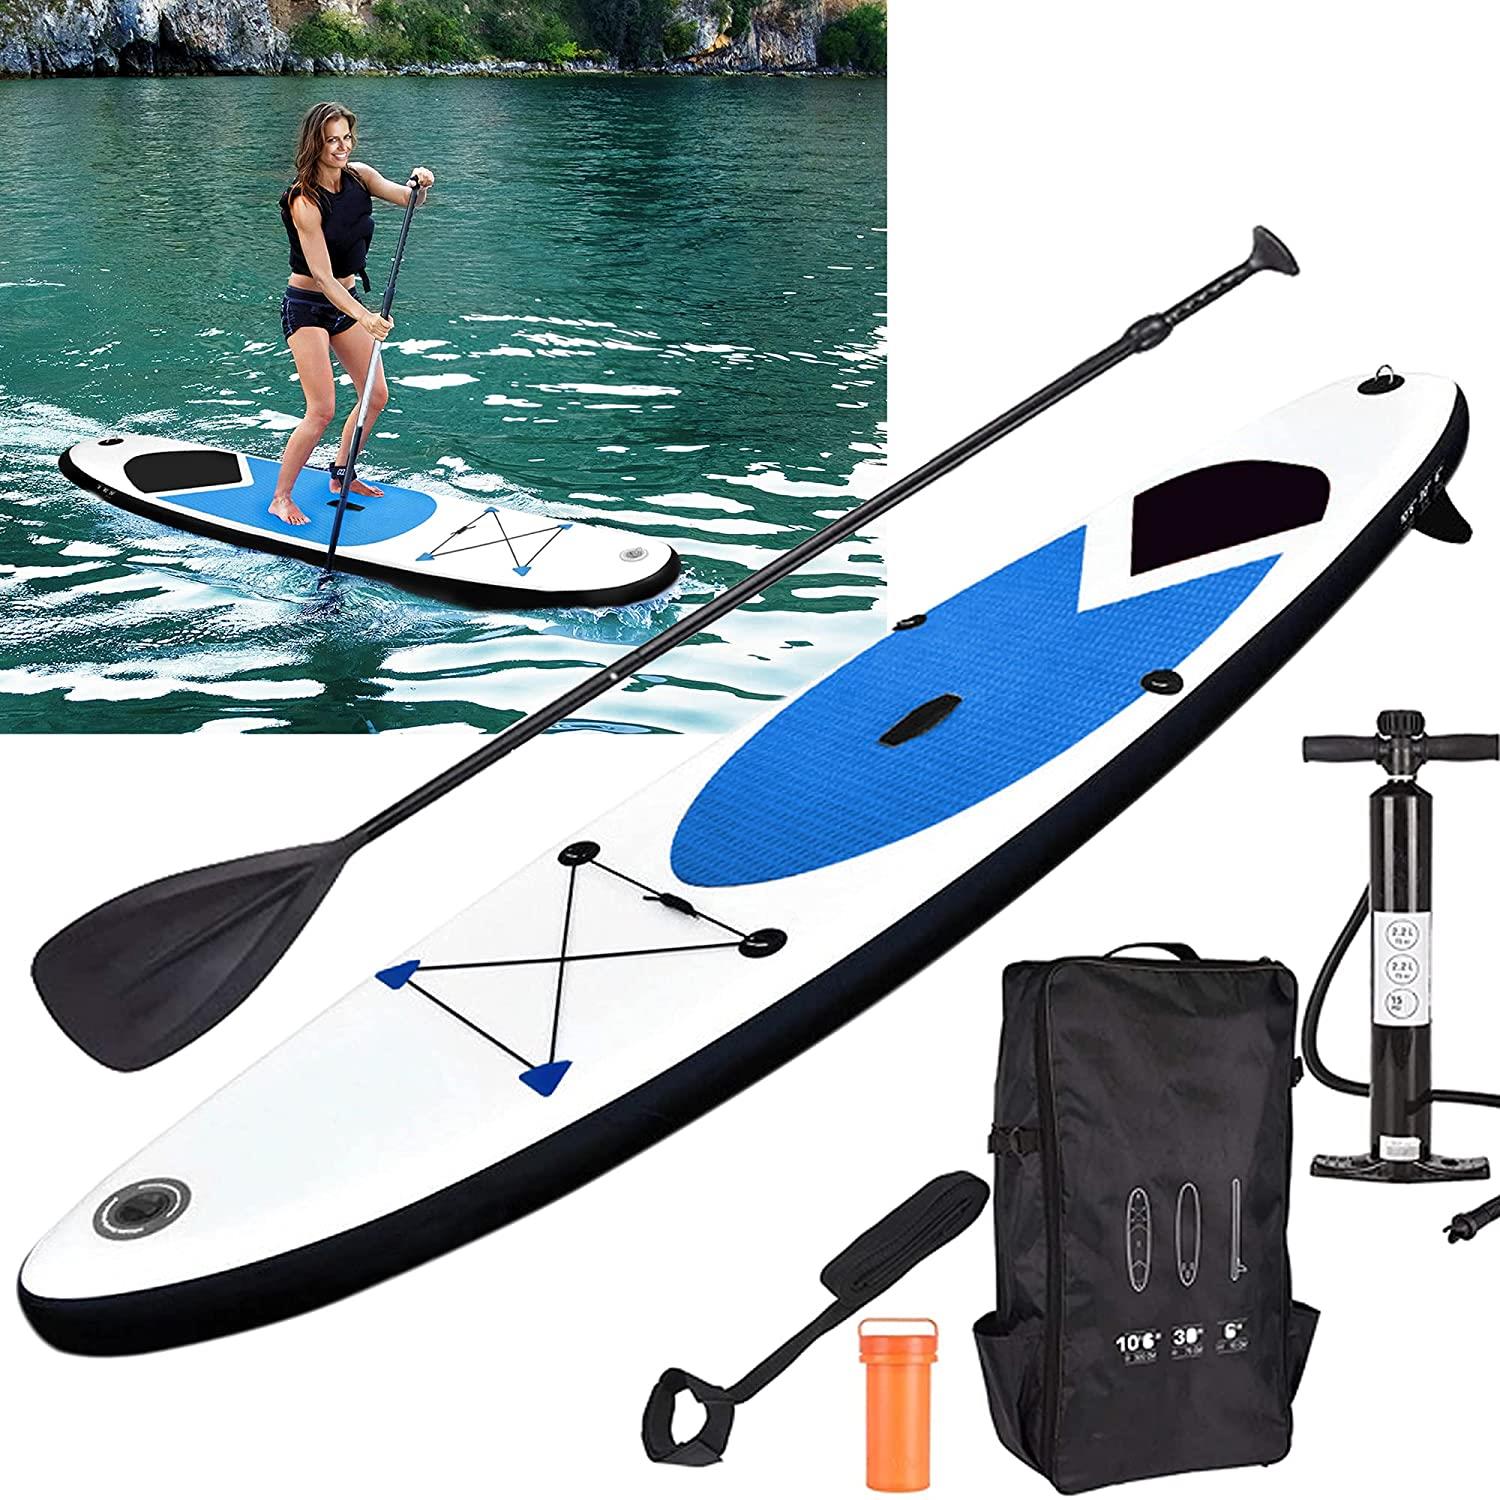 Blue Inflatable 305cm SUP Stand Up Paddle Board Surf Board by Geezy - The Magic Toy Shop